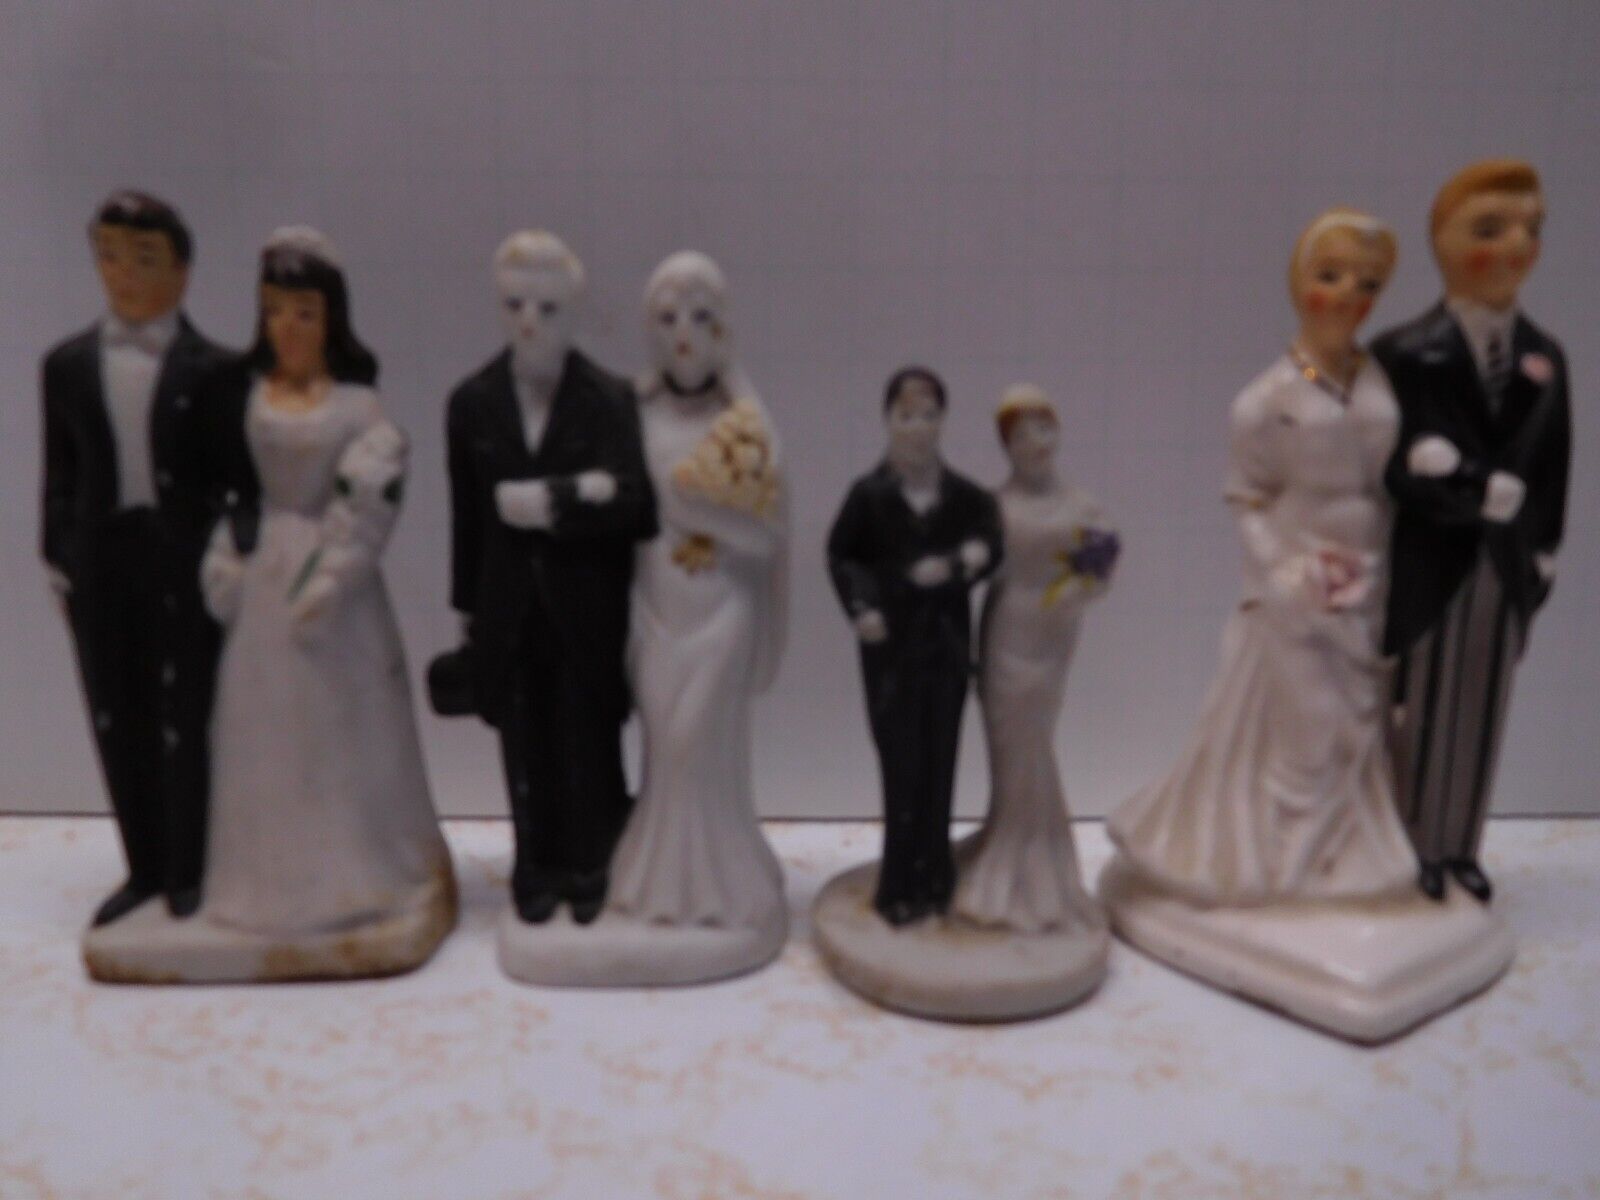 4 Vintage 1920's to 1950's Bride & Groom Cake Toppers  ~ One From Occupied Japan